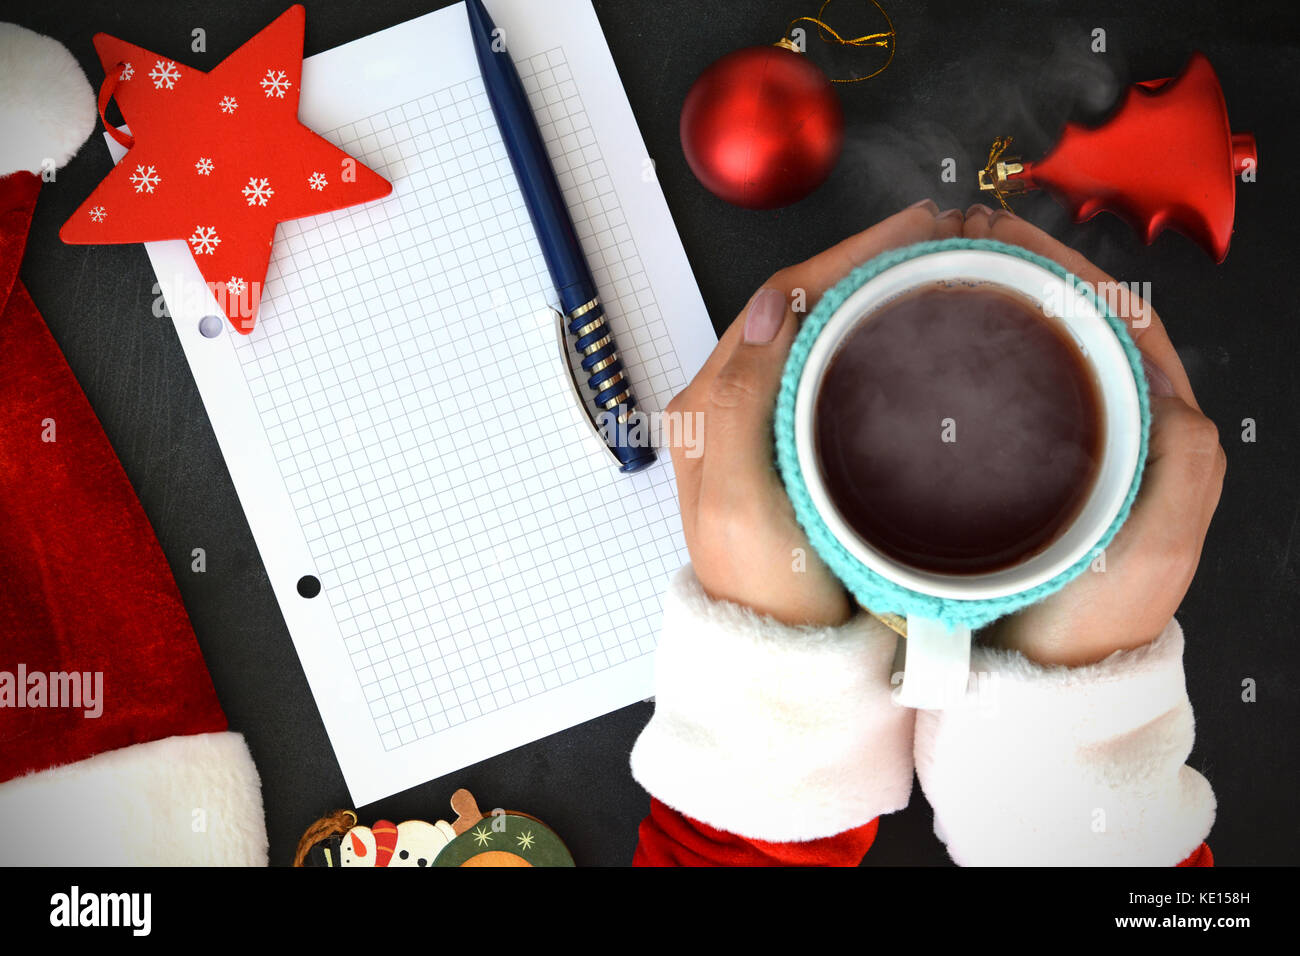 Woman in Santa’s clothes holding a cup of hot tea on Christmas background, near an empty wish list Stock Photo